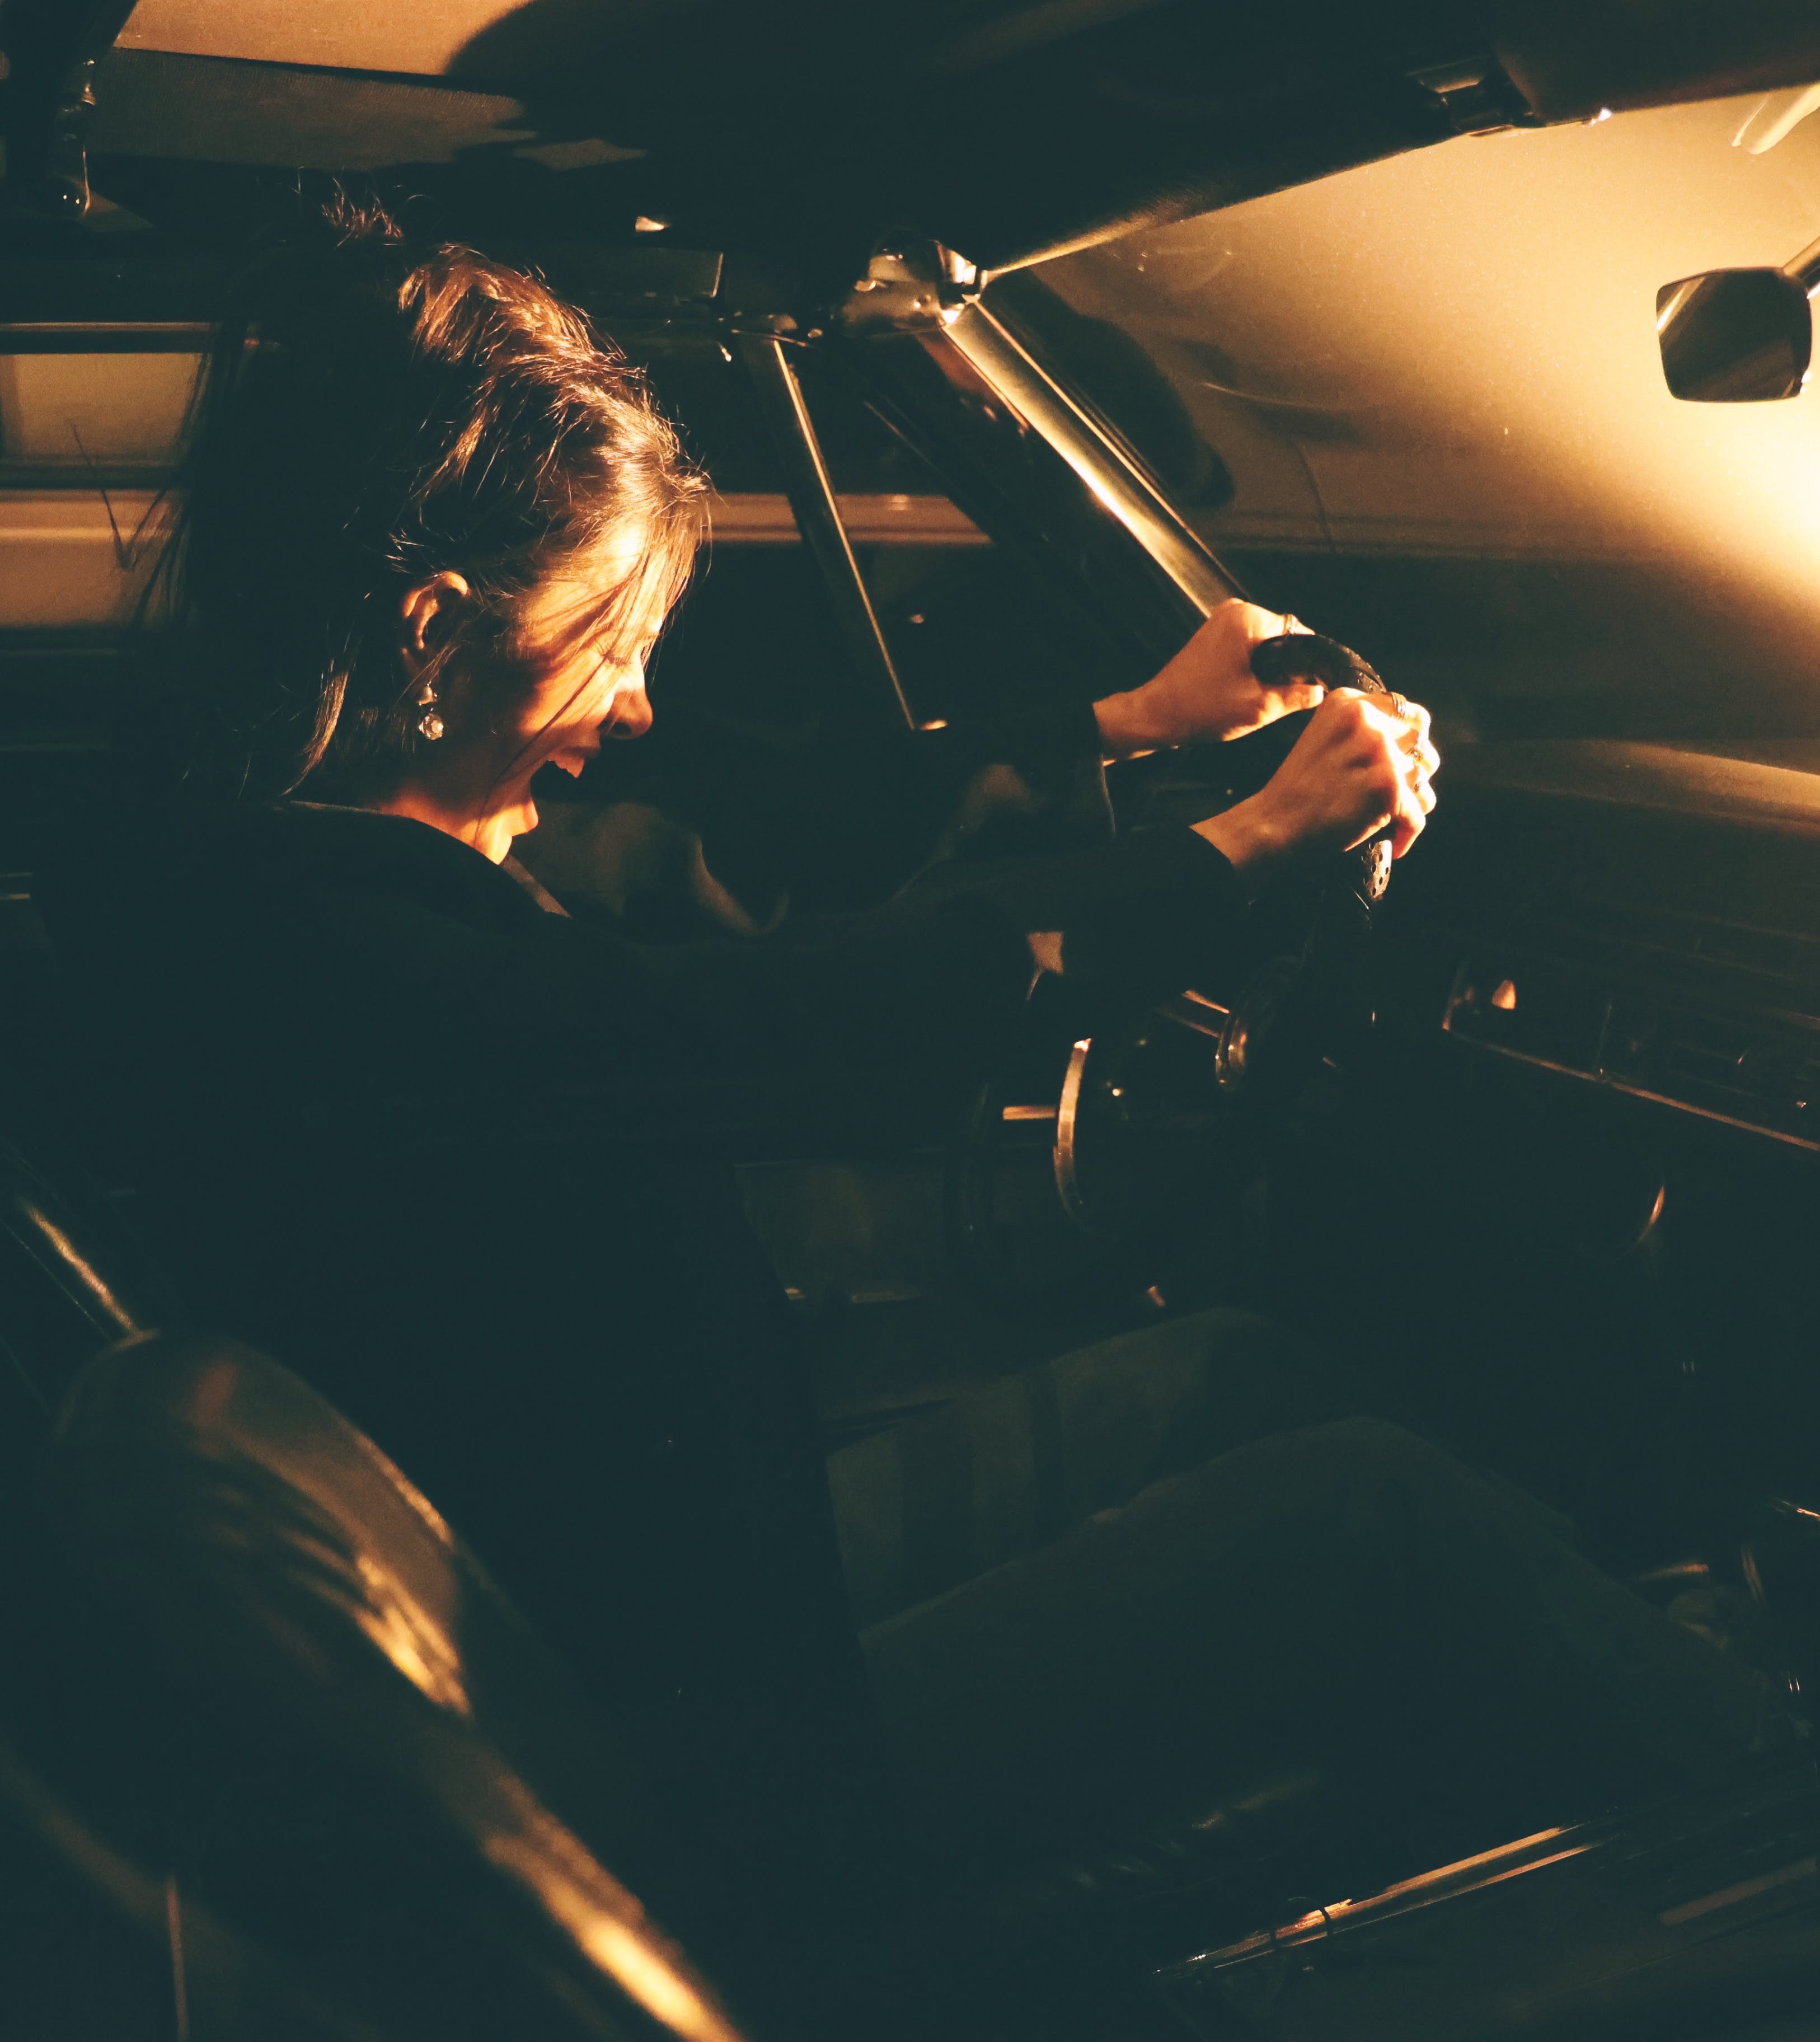 A woman sitting and shouting inside a car | Source: Pexels